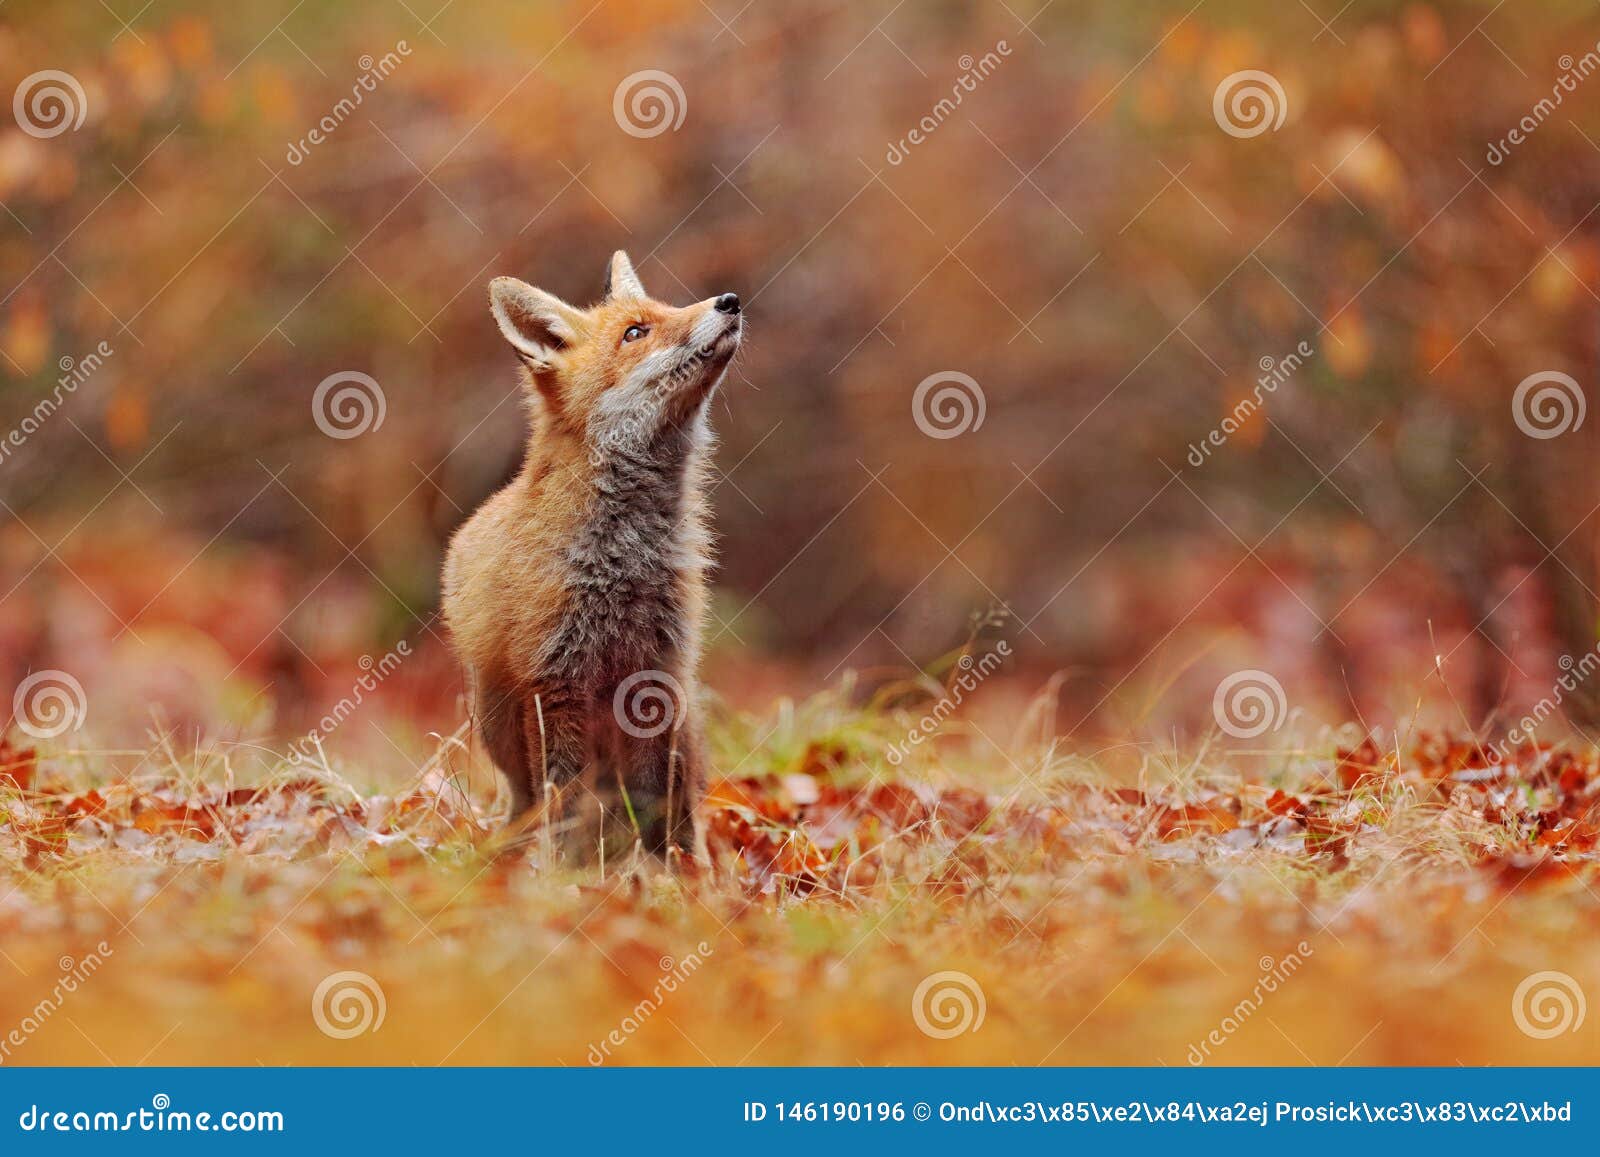 red fox running on orange autumn leaves. cute red fox, vulpes vulpes in fall forest. beautiful animal in the nature habitat.